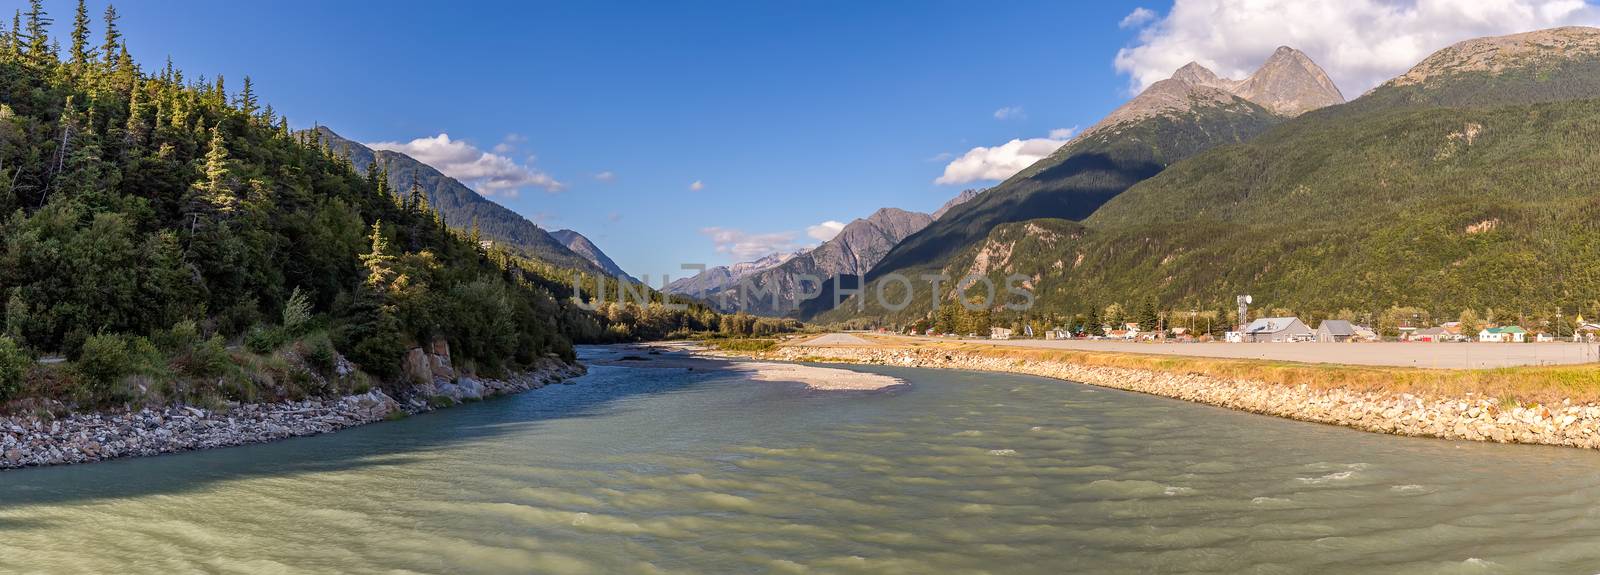 View of Skagway River and Skagway airport at sunset in Alaska. Golden hour. Blue cloudy sky and mountain peaks in the background by DamantisZ